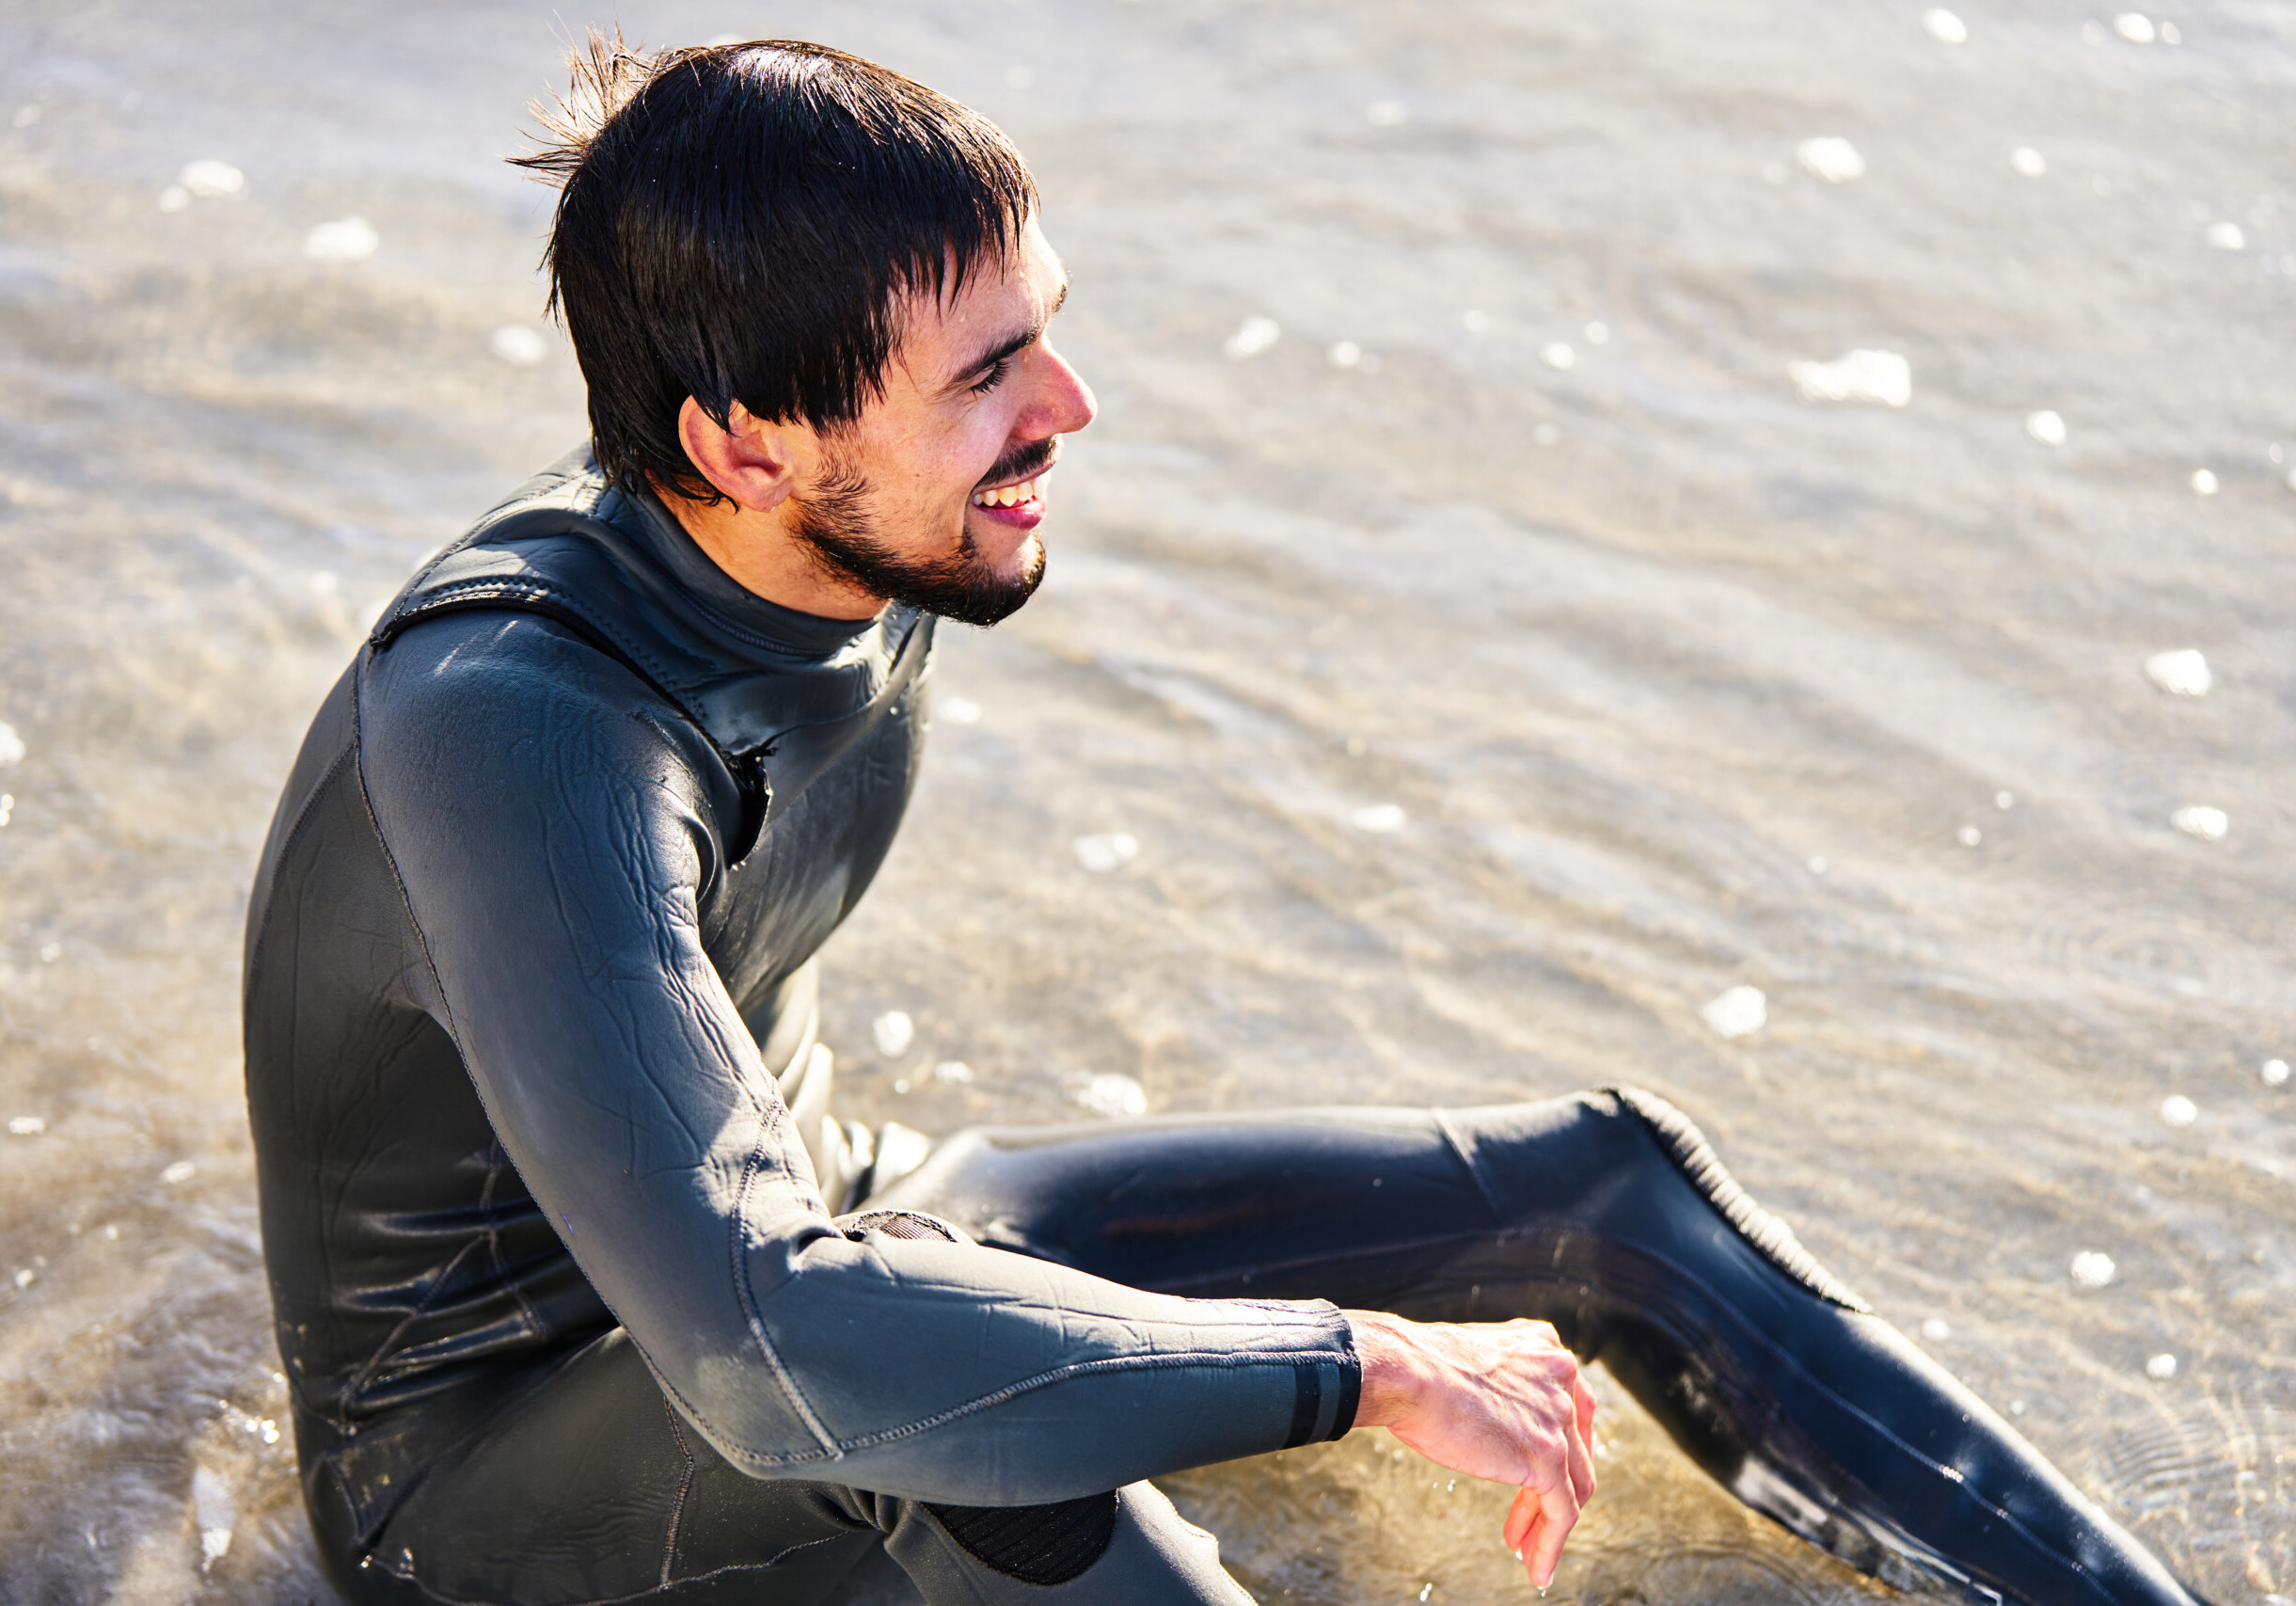 A content male surfer in a wetsuit sits at the water's edge, basking in the sunlight with a pleased smile after an exhilarating surf session